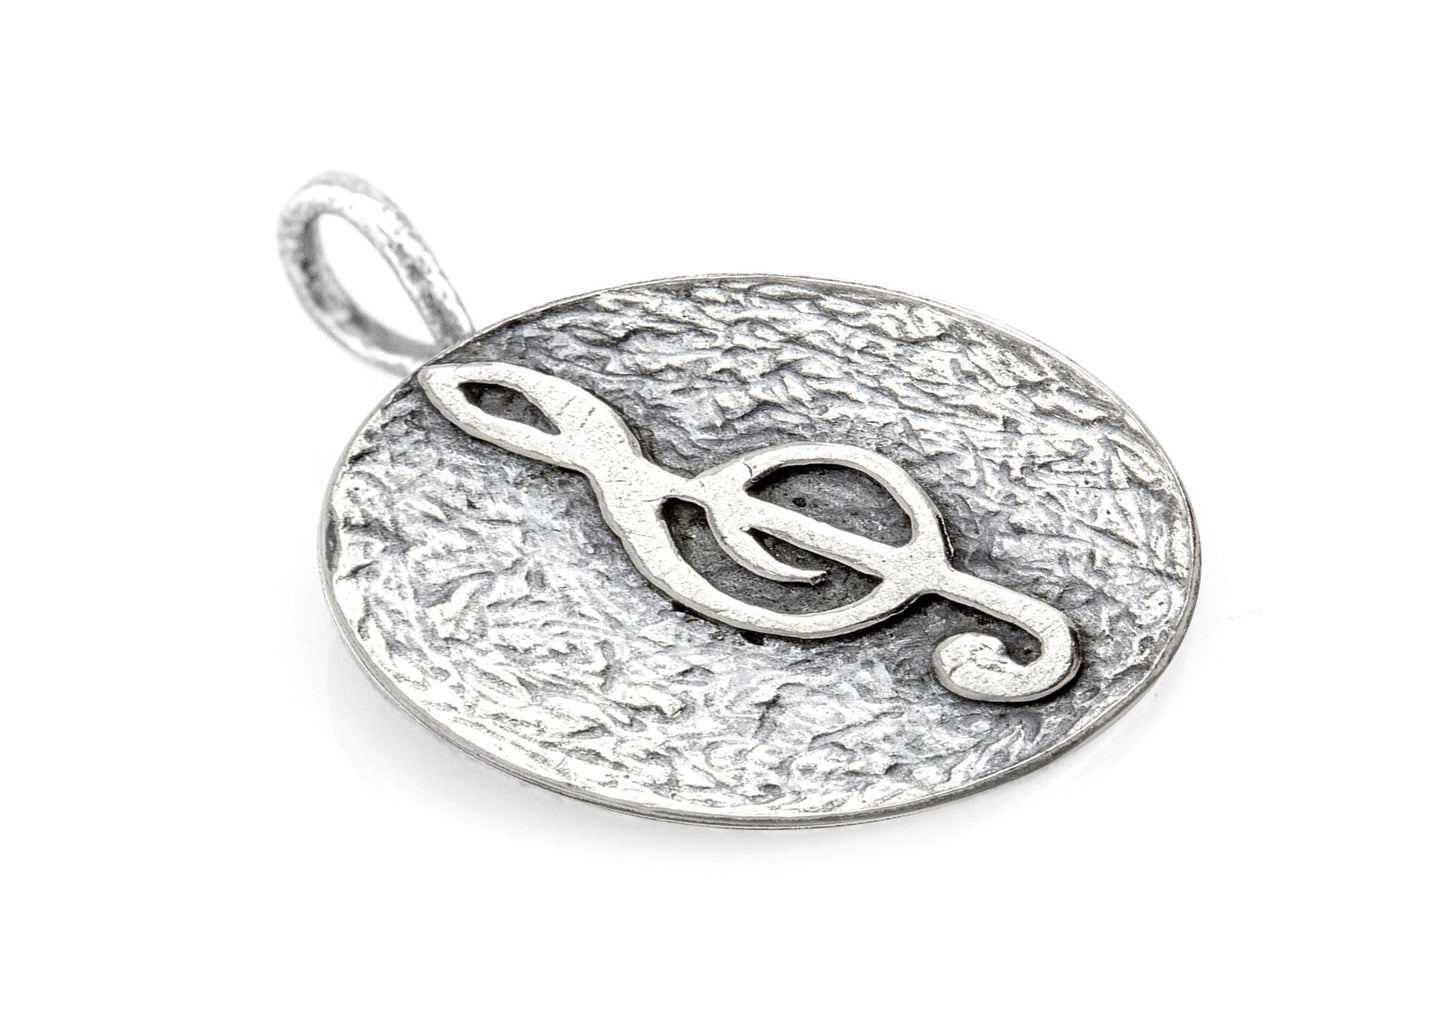 Sol Key Musical Coin Medallion Necklace